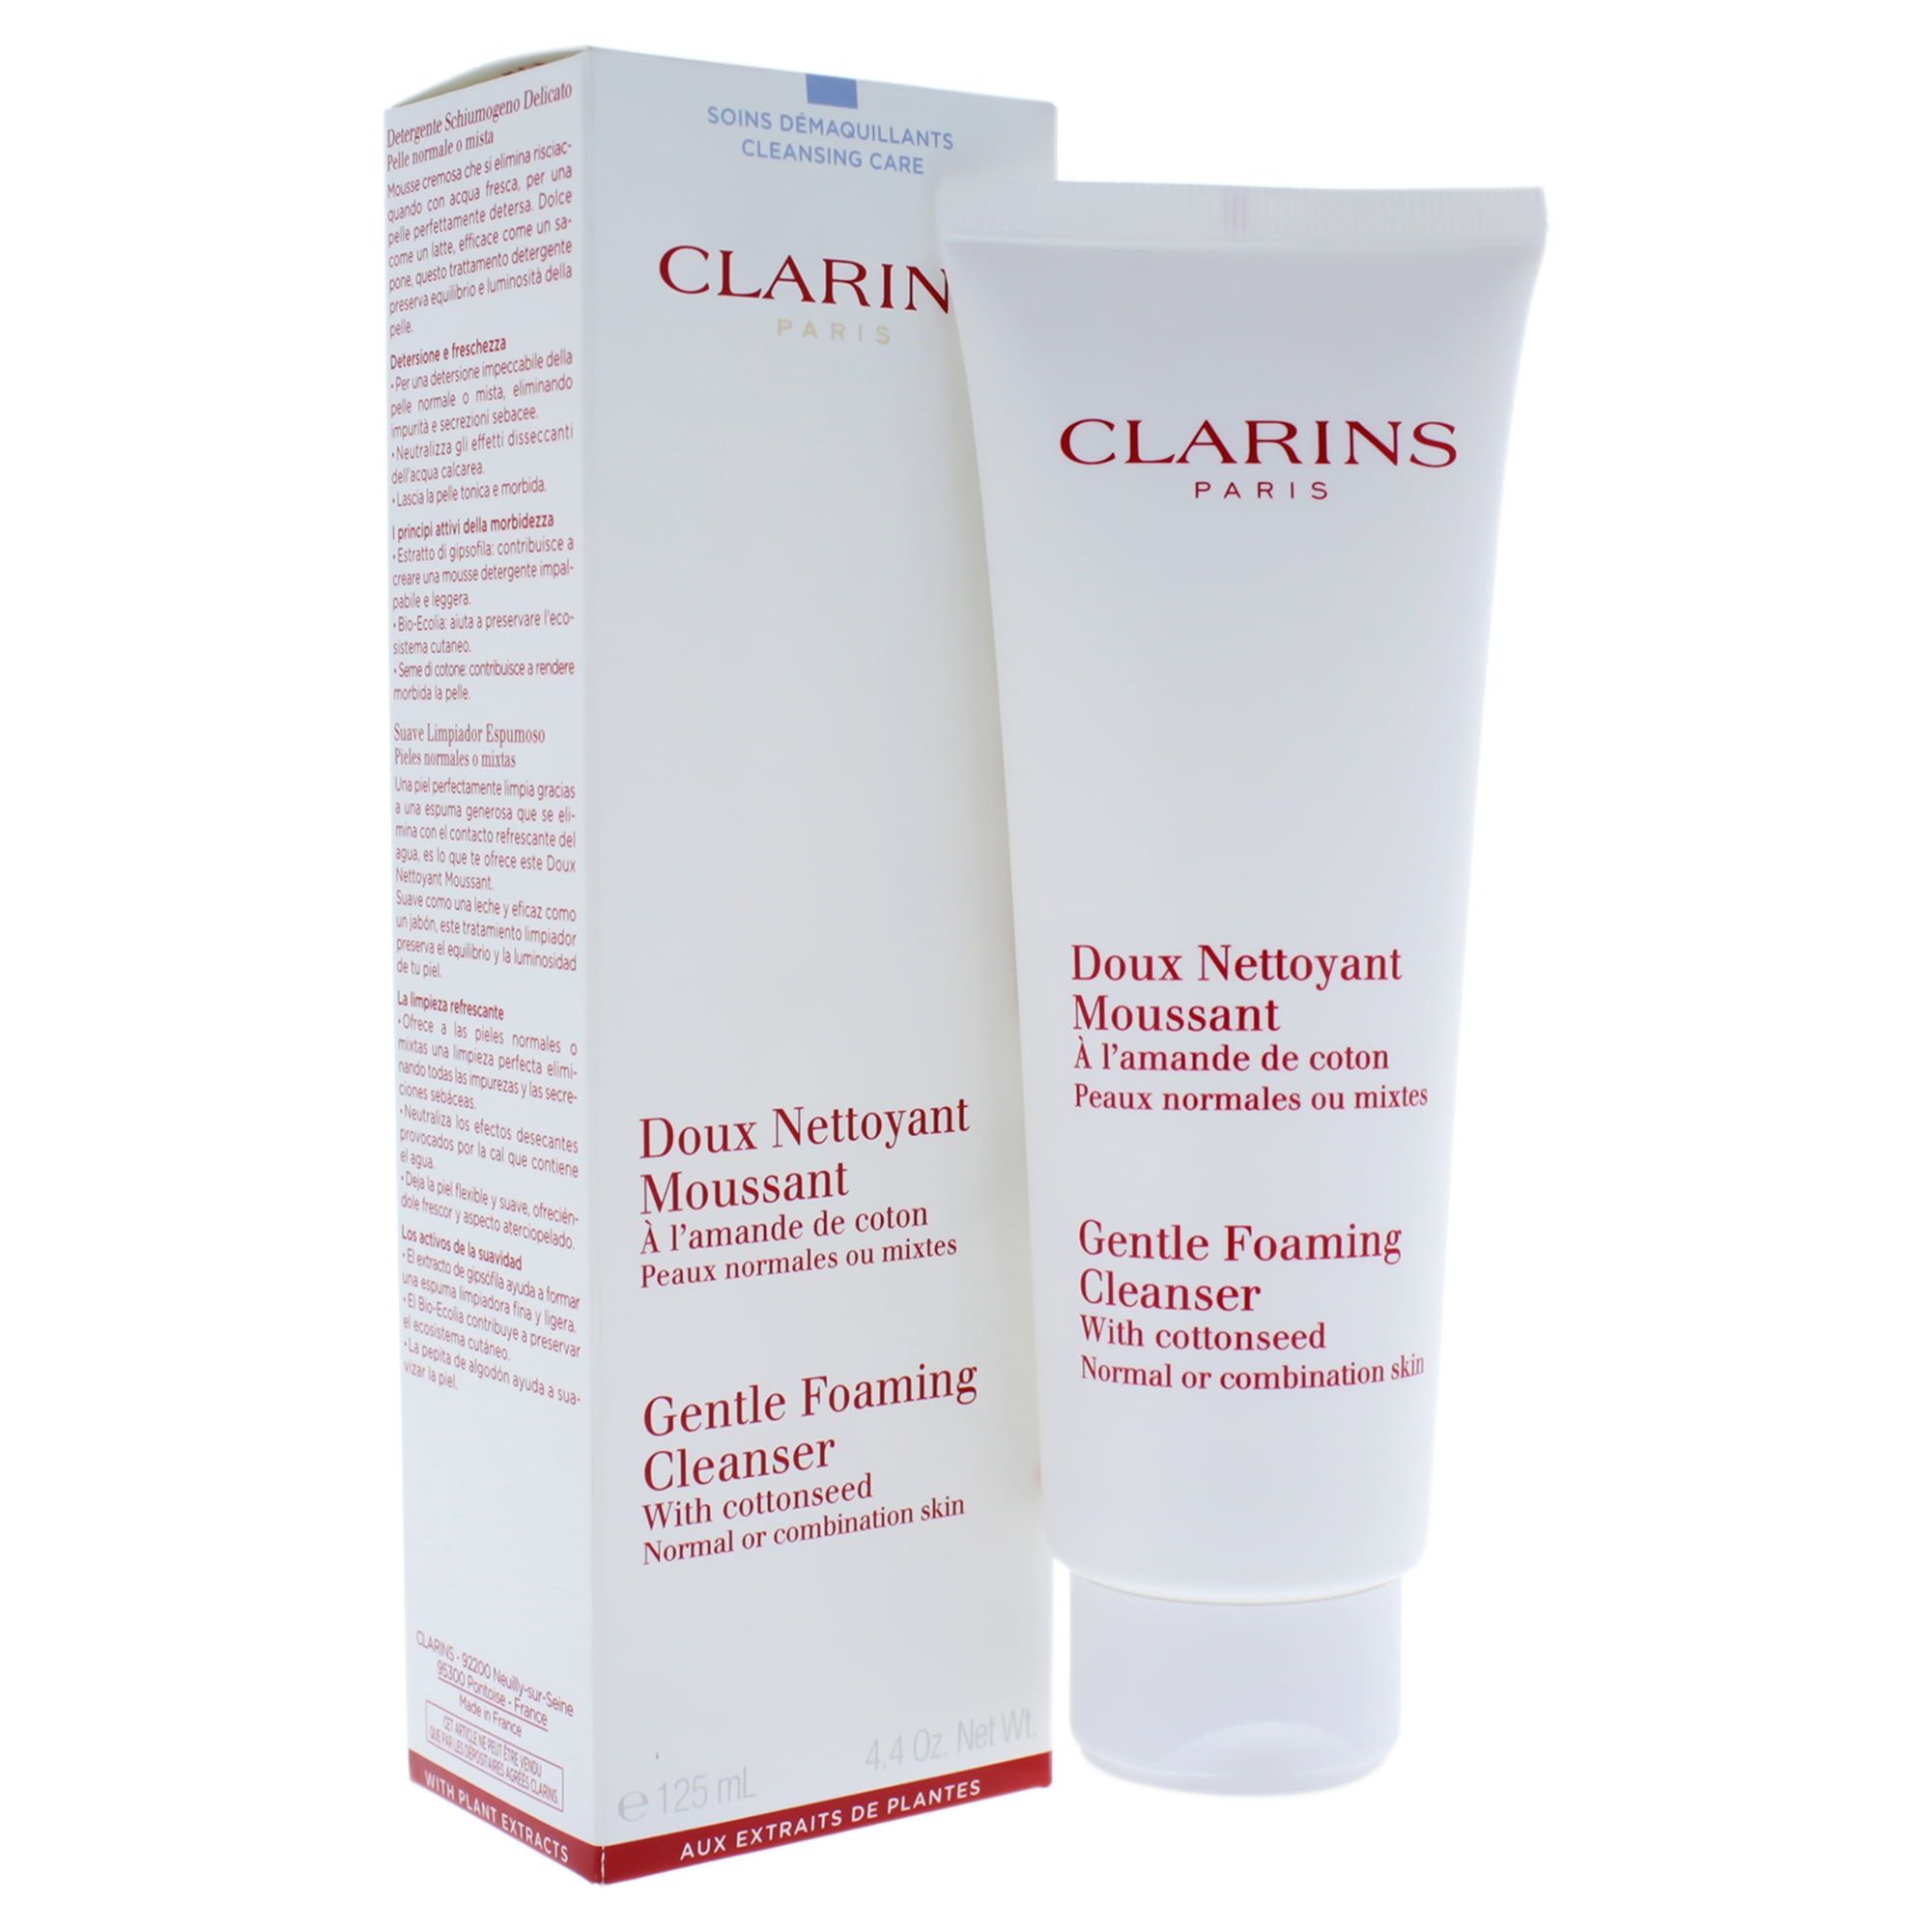 Gentle foaming cleanser. Кларанс doux nettoyant moussant. Clarins doux nettoyant moussant gentle Foaming Cleanser. Гентле Фоам. Clarins Cleansing Cream.